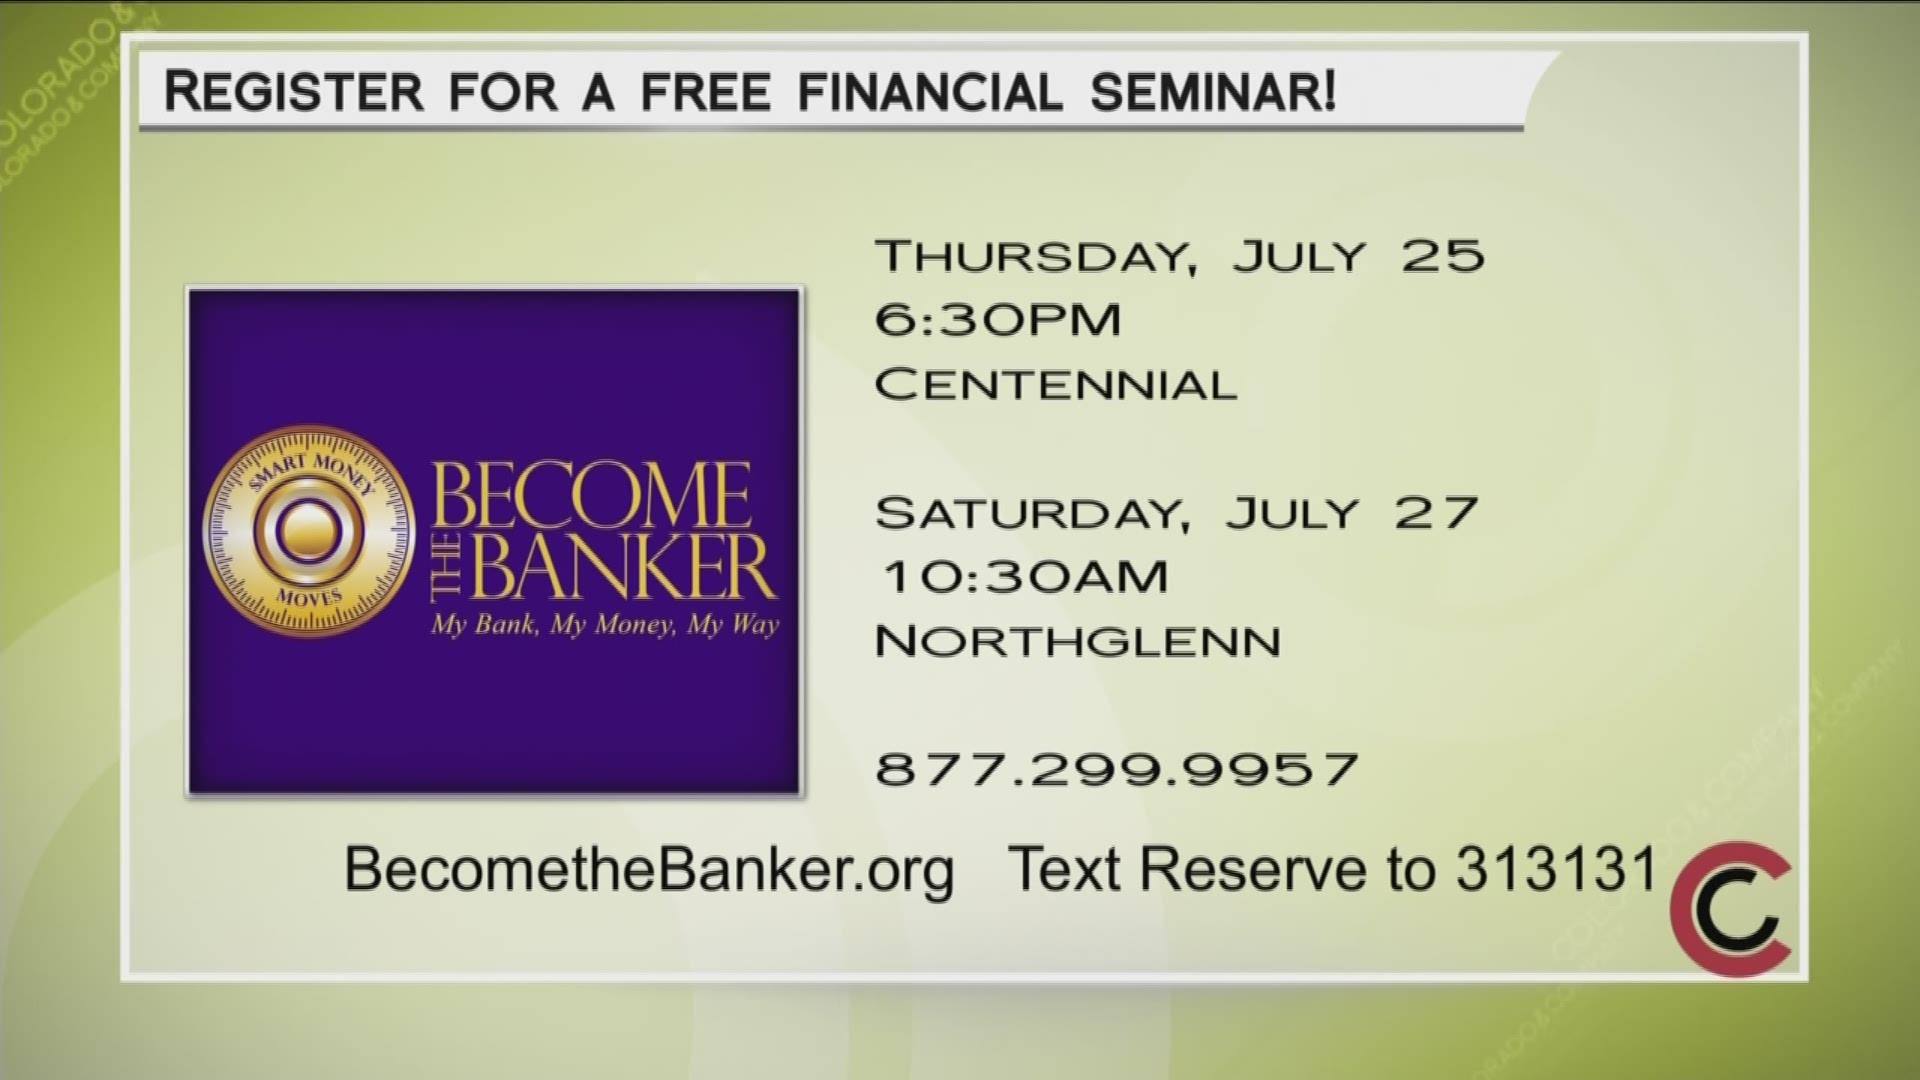 Get on the road to financial freedom by signing up for a free Become the Banker seminar. There is one in Centennial on July 25th, and one in Northglenn on July 27th. Register by calling 877.299.9957, or by texting RESERVE to 313131. Learn more at www.BecomeTheBanker.org. 
THIS INTERVIEW HAS COMMERCIAL CONTENT. PRODUCTS AND SERVICES FEATURED APPEAR AS PAID ADVERTISING.